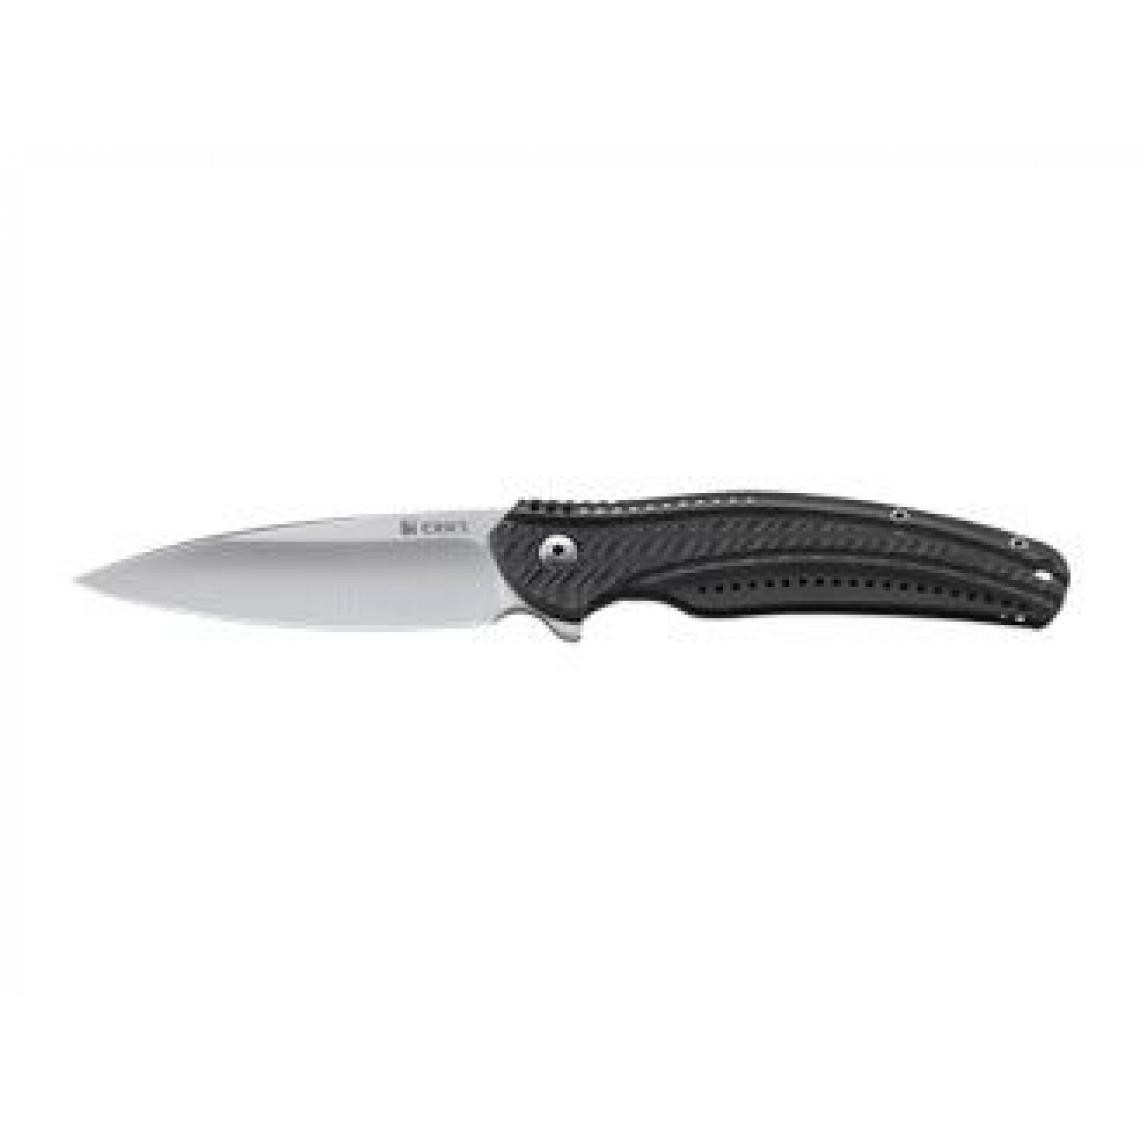 Crkt - Crkt RIPPLE STAINLESS GREY K406GXP - Outils de coupe